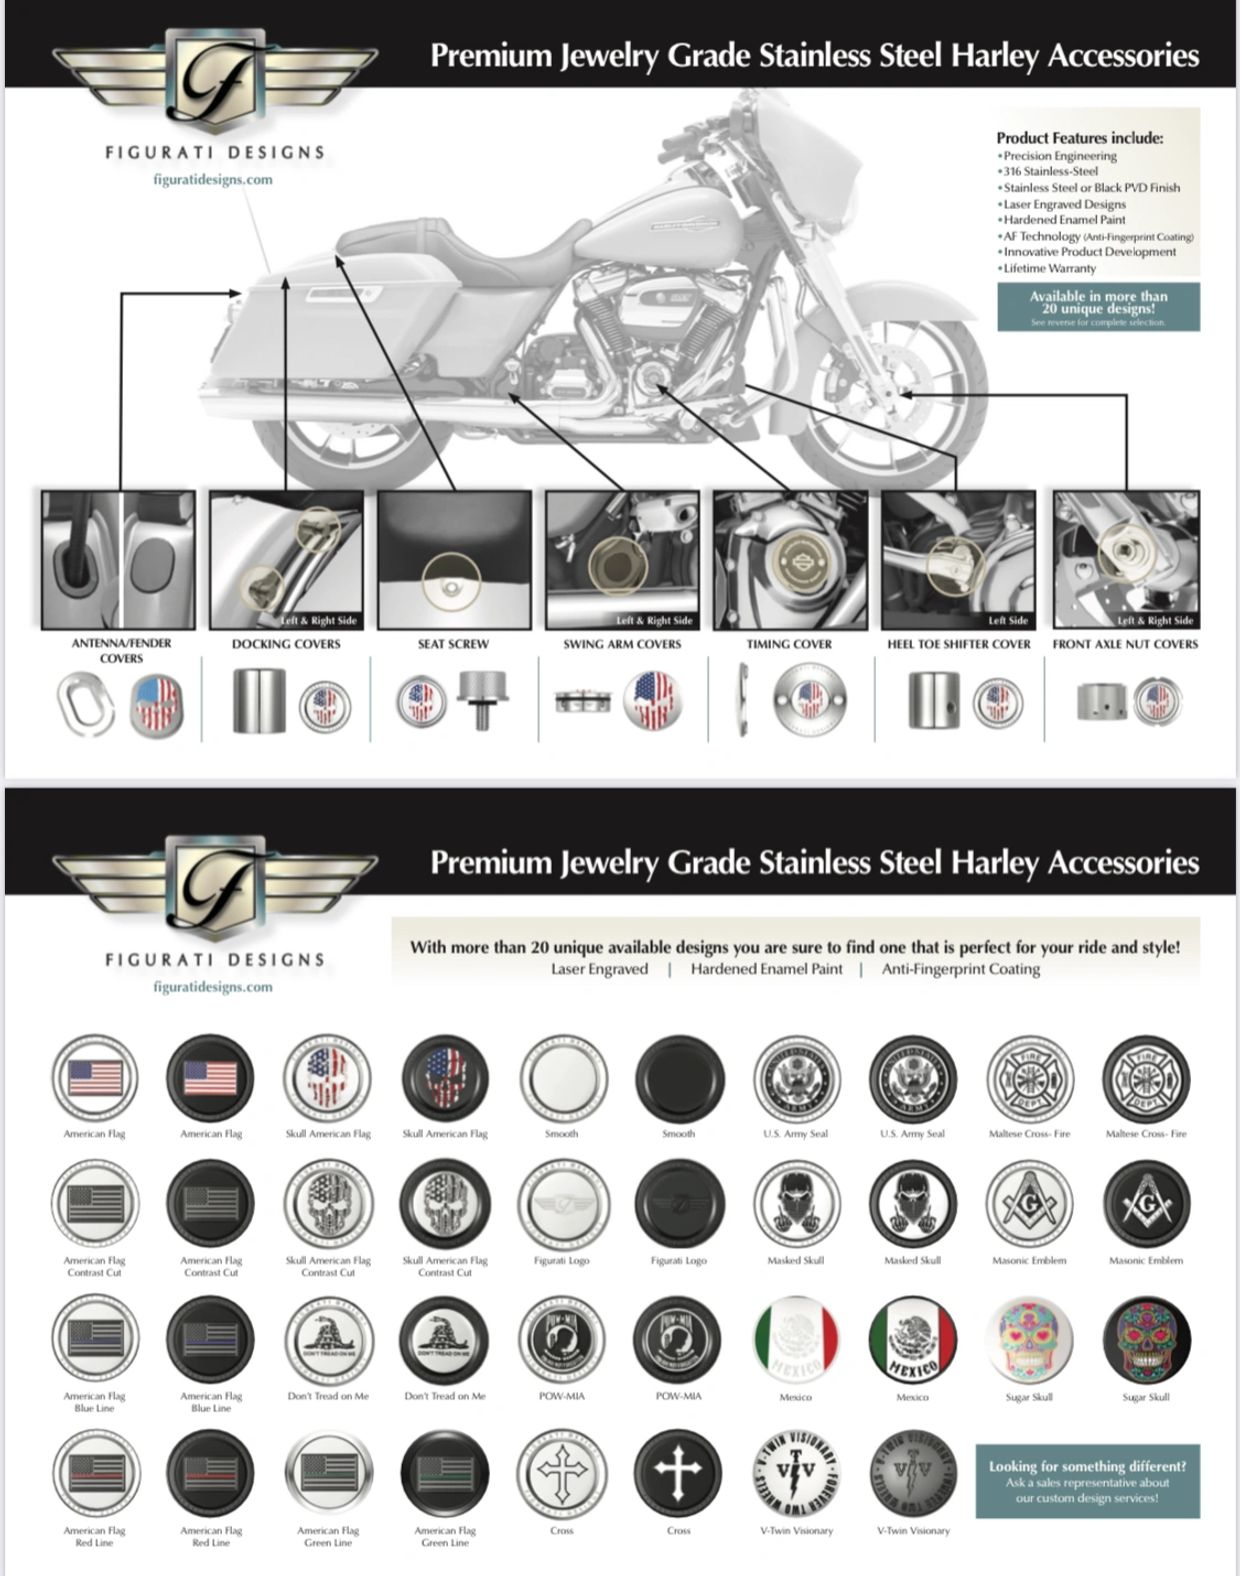 sjælden Montgomery Ultimate Figurati Designs - Harley-Davidson Motorcycles Aftermarket Parts and  Accessories, Military Discount